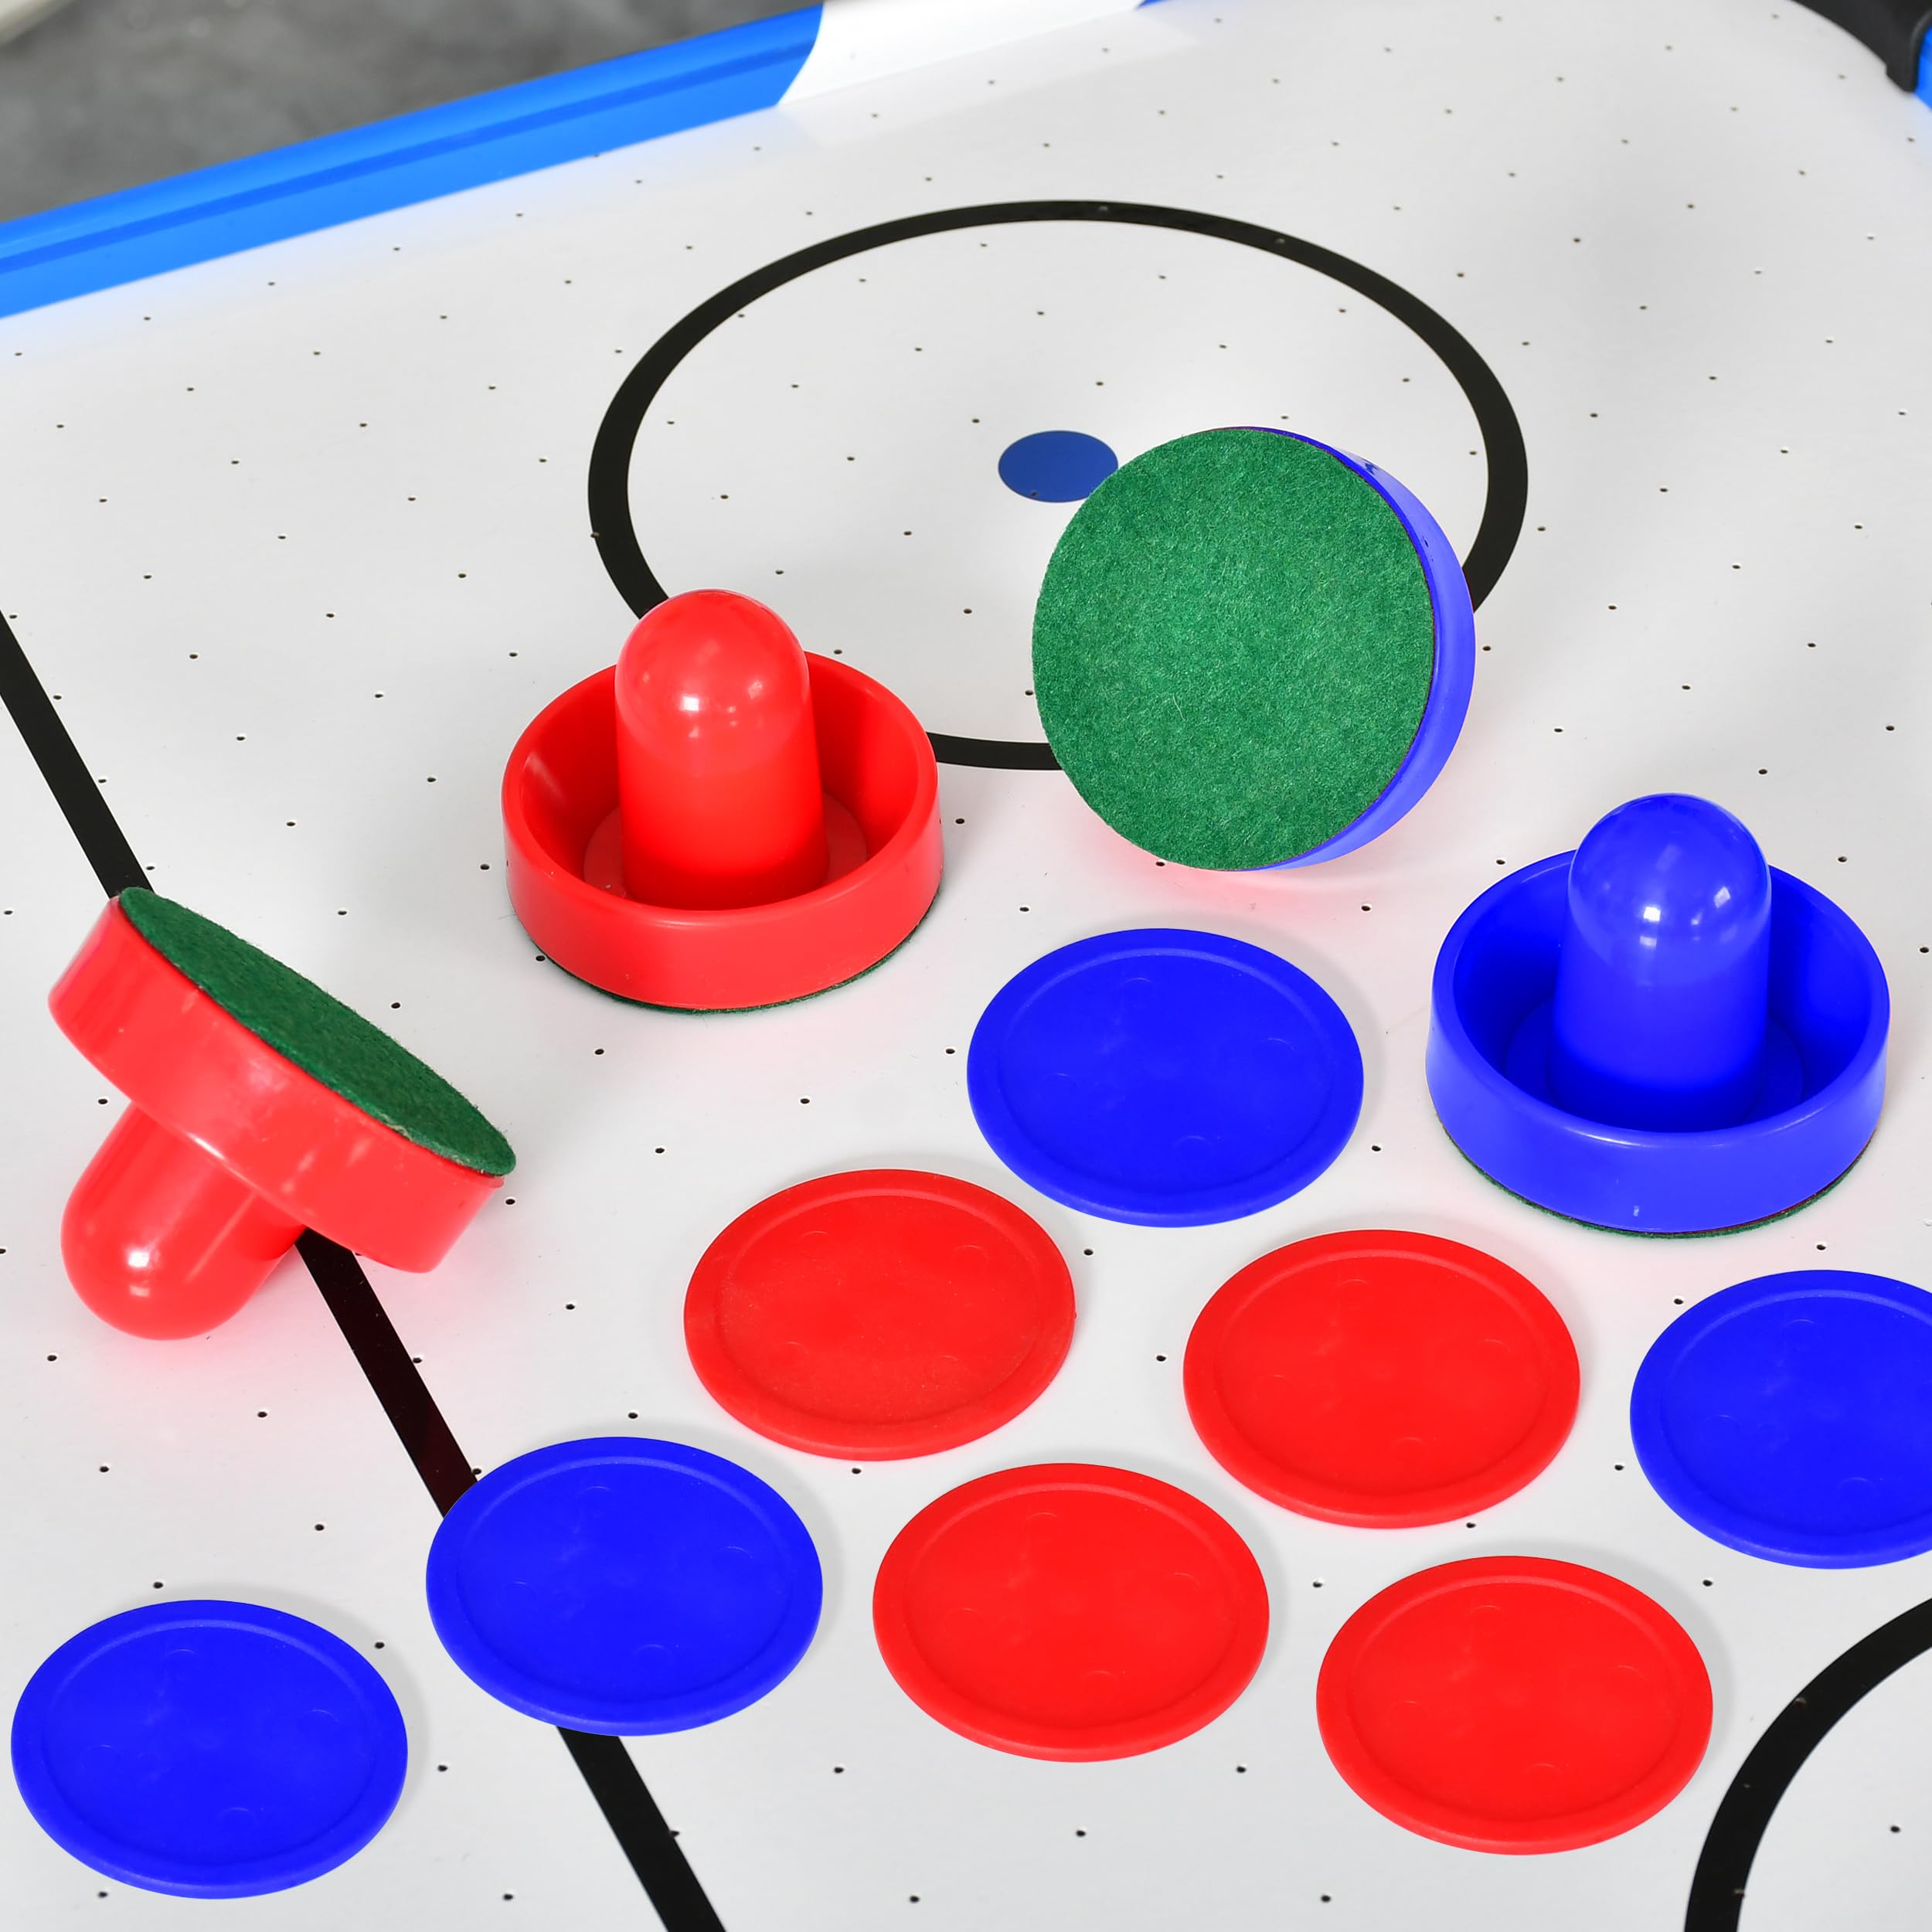 SereneLife Air Hockey Table Accessories Set, Includes 8 Pucks and 4 Pushers, Smooth Glide with Comfortable Grip